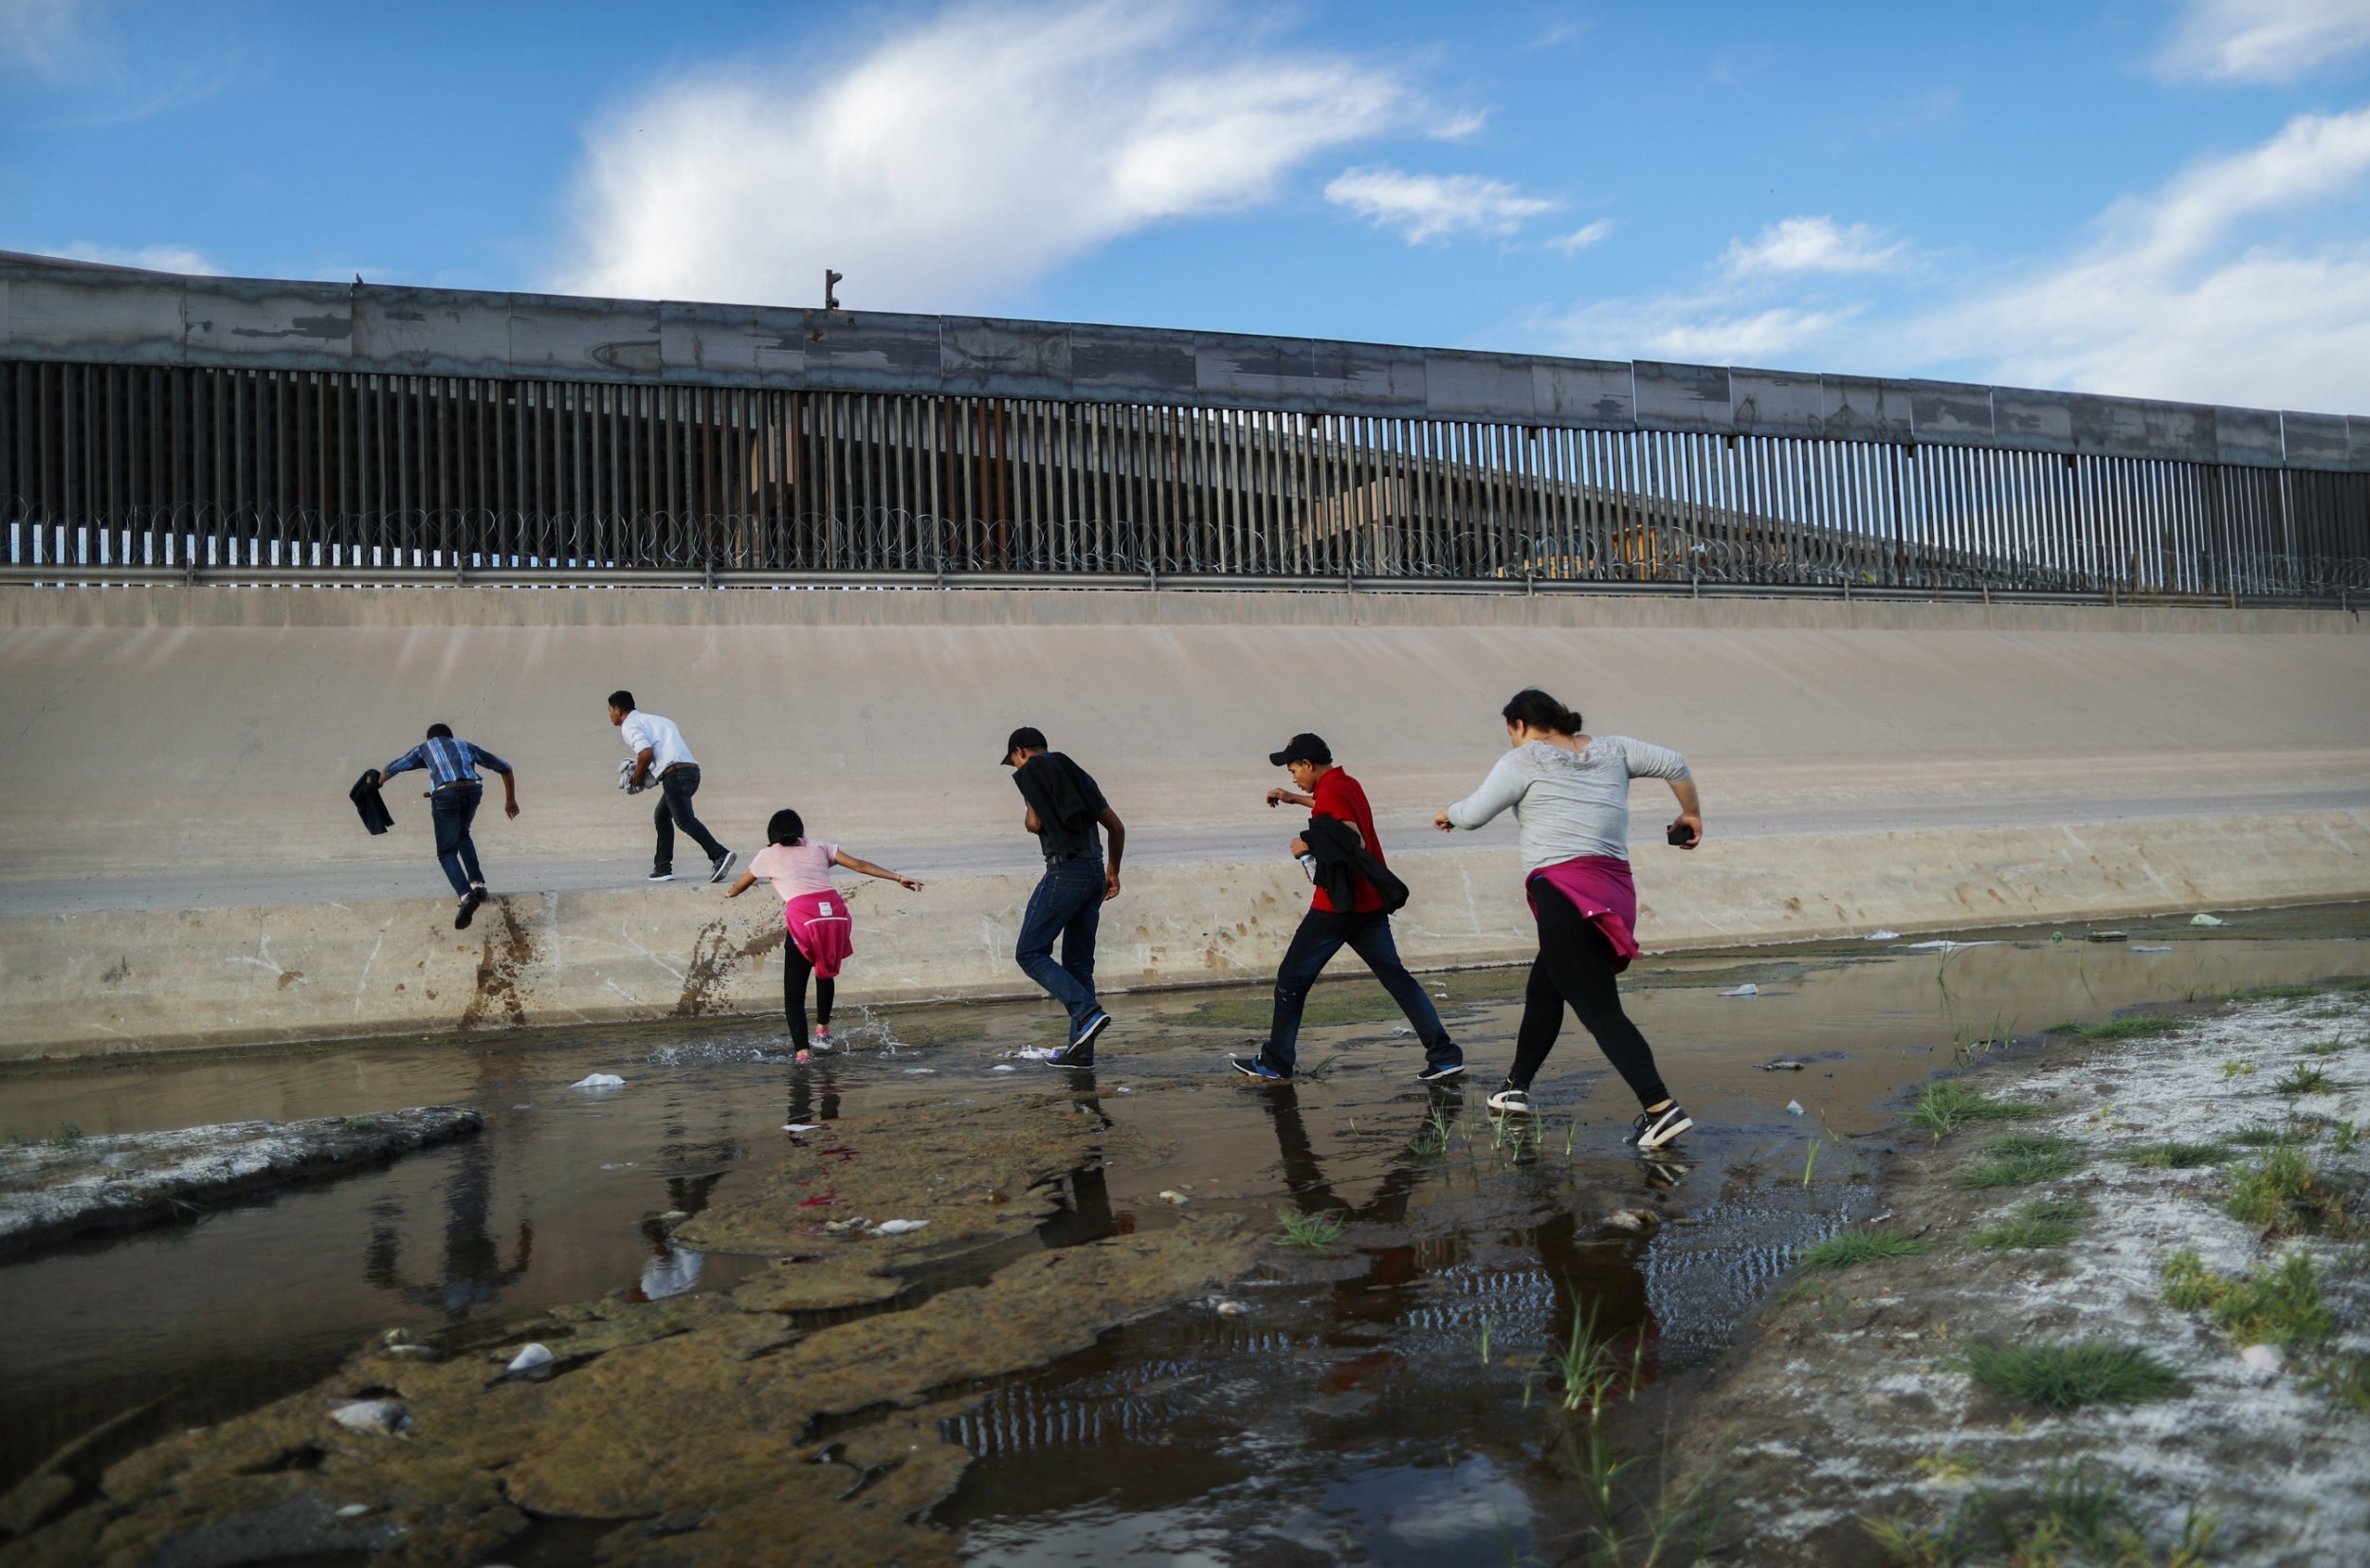 Migrants cross the Rio Grande into the United States on 19 May 2019. Approximately 1,000 migrants per day are being released by authorities in the El Paso sector of the US-Mexico border